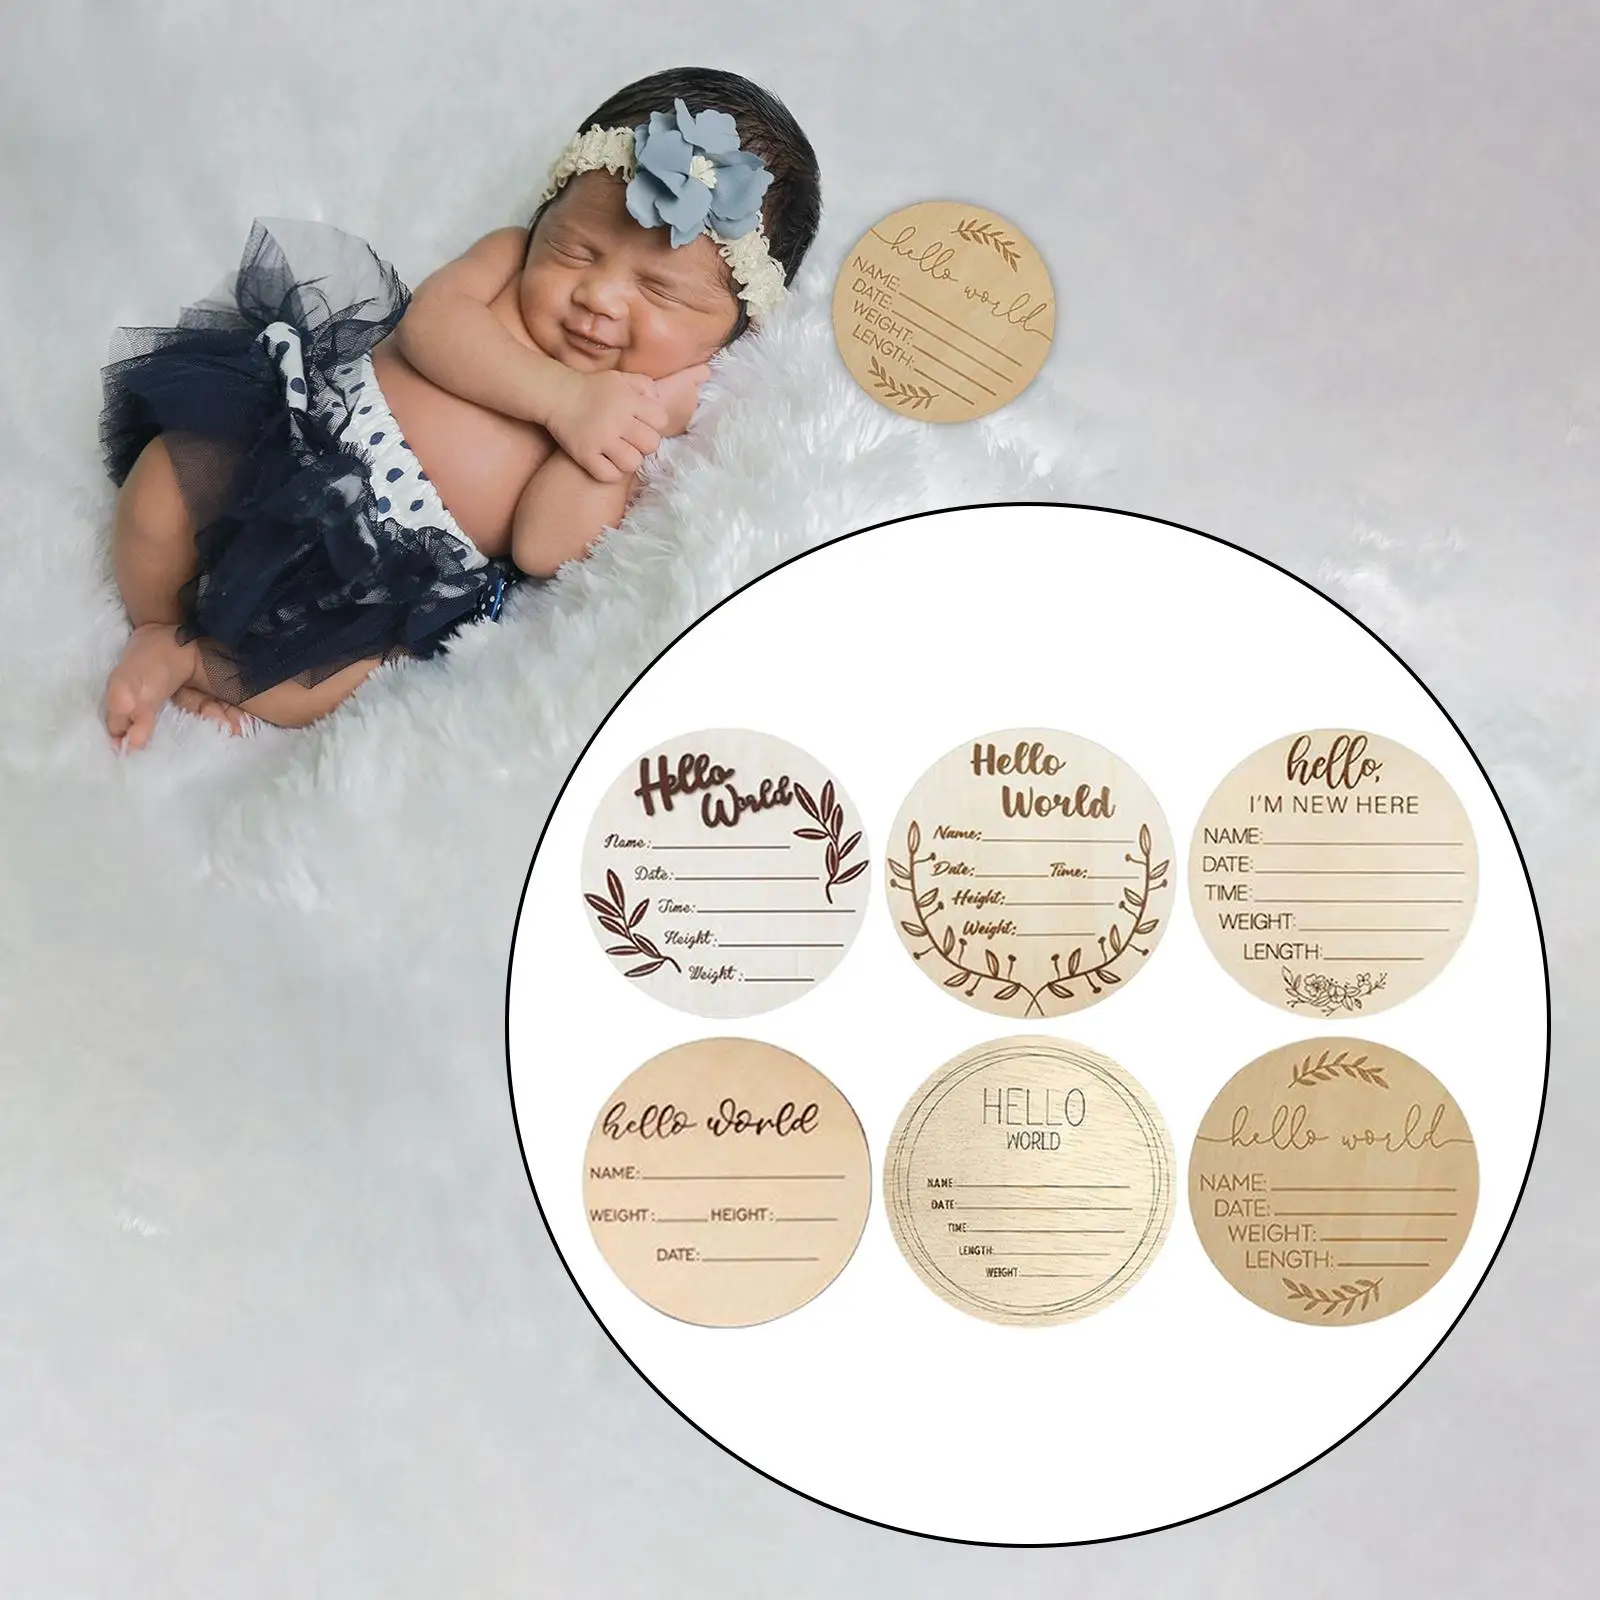 18x Baby Monthly Milestone Cards for Photography Props Infants  